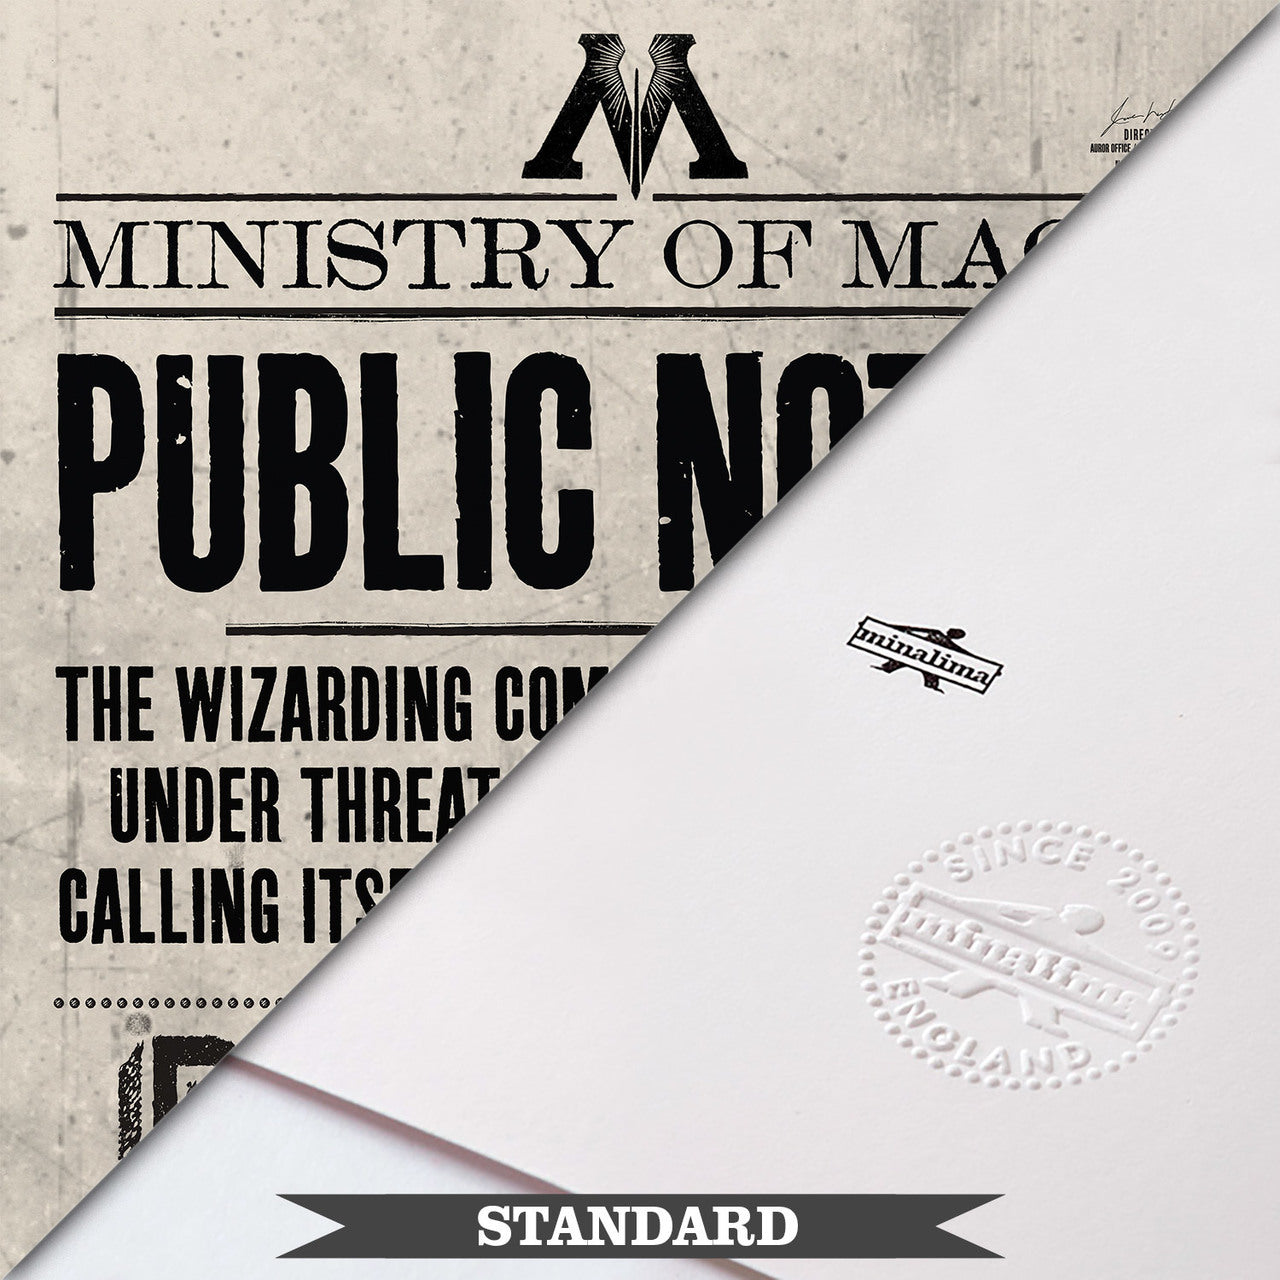 Ministry of Magic Public Notice Limited Edition Art Print